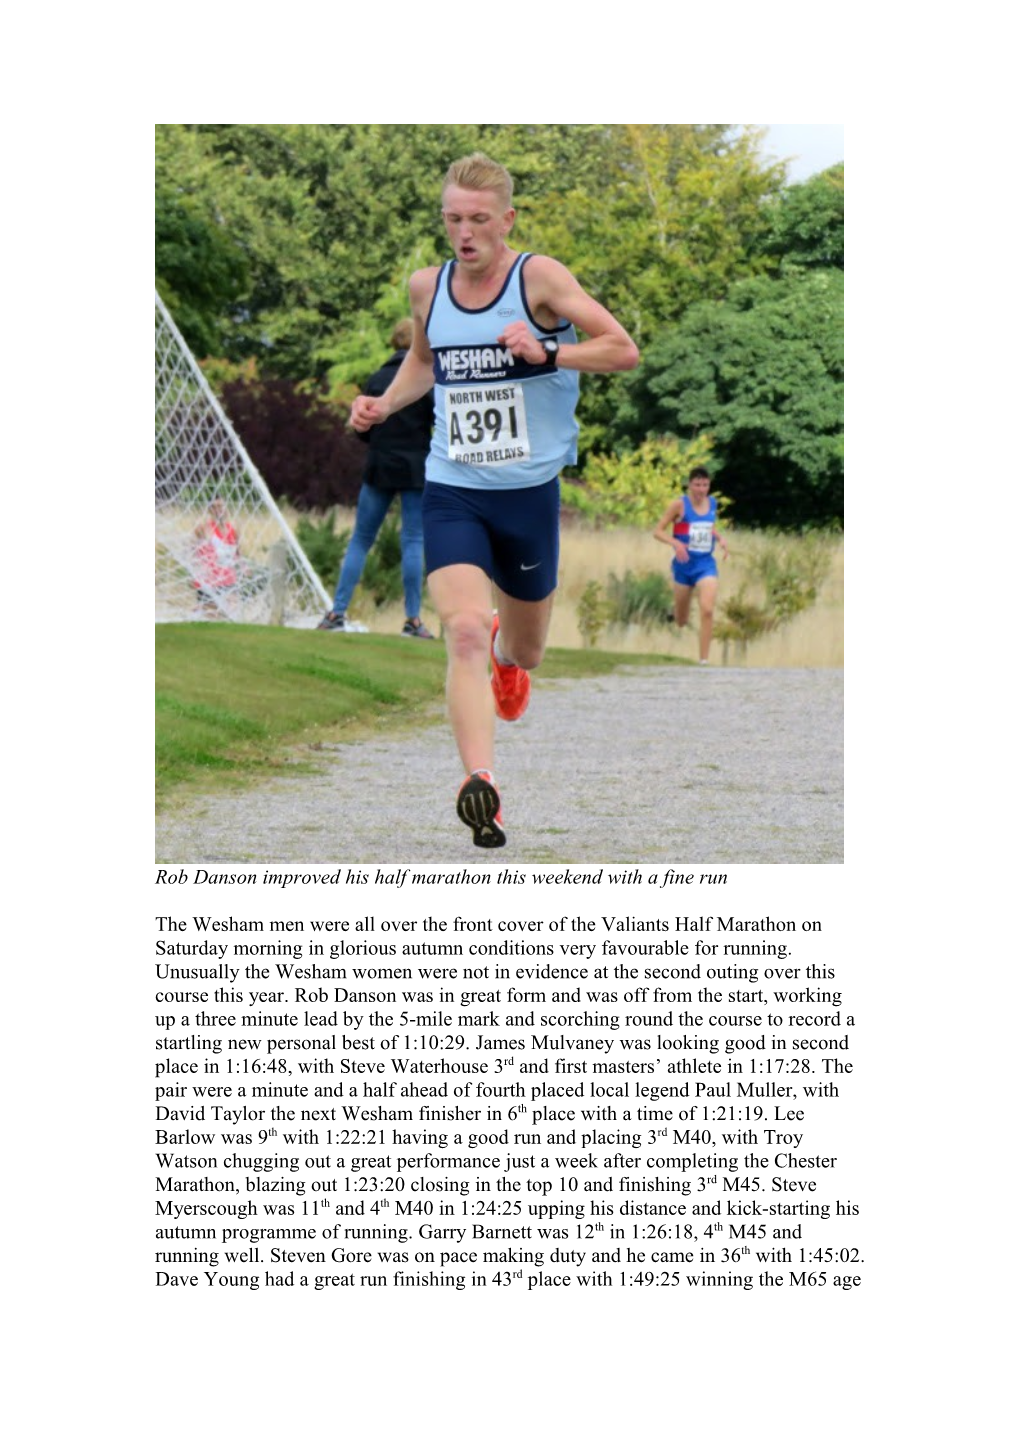 The Wesham Men Were All Over the Front Cover of the Valiants Half Marathon on Saturday